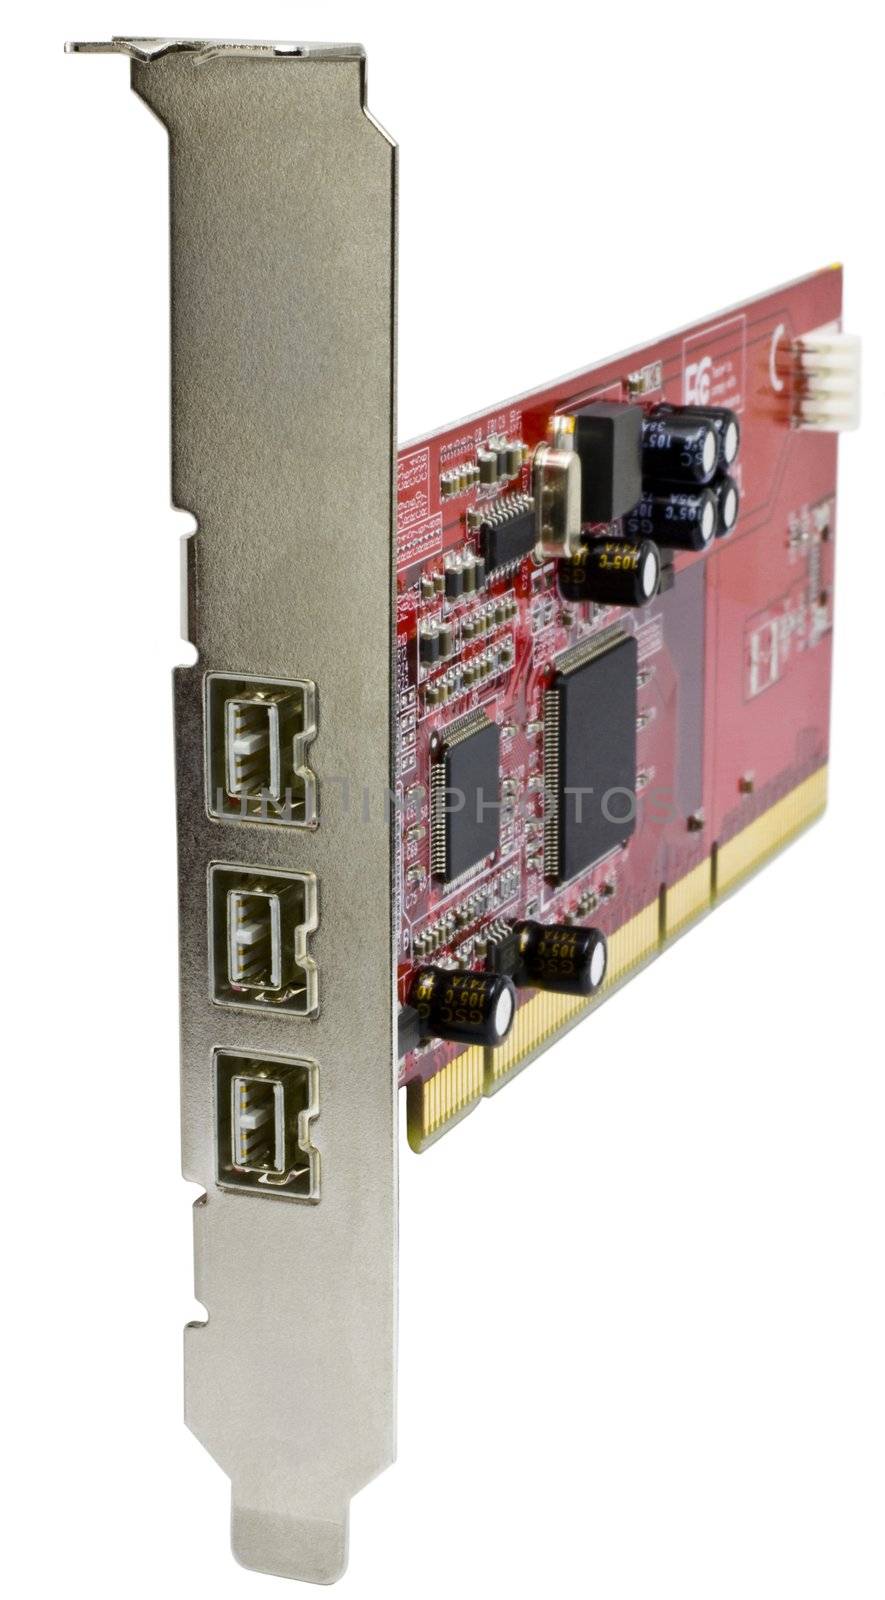 PCI-X Card with three FireWire 800 connectors. White background. The card is used to connect professional audio and video equipment.